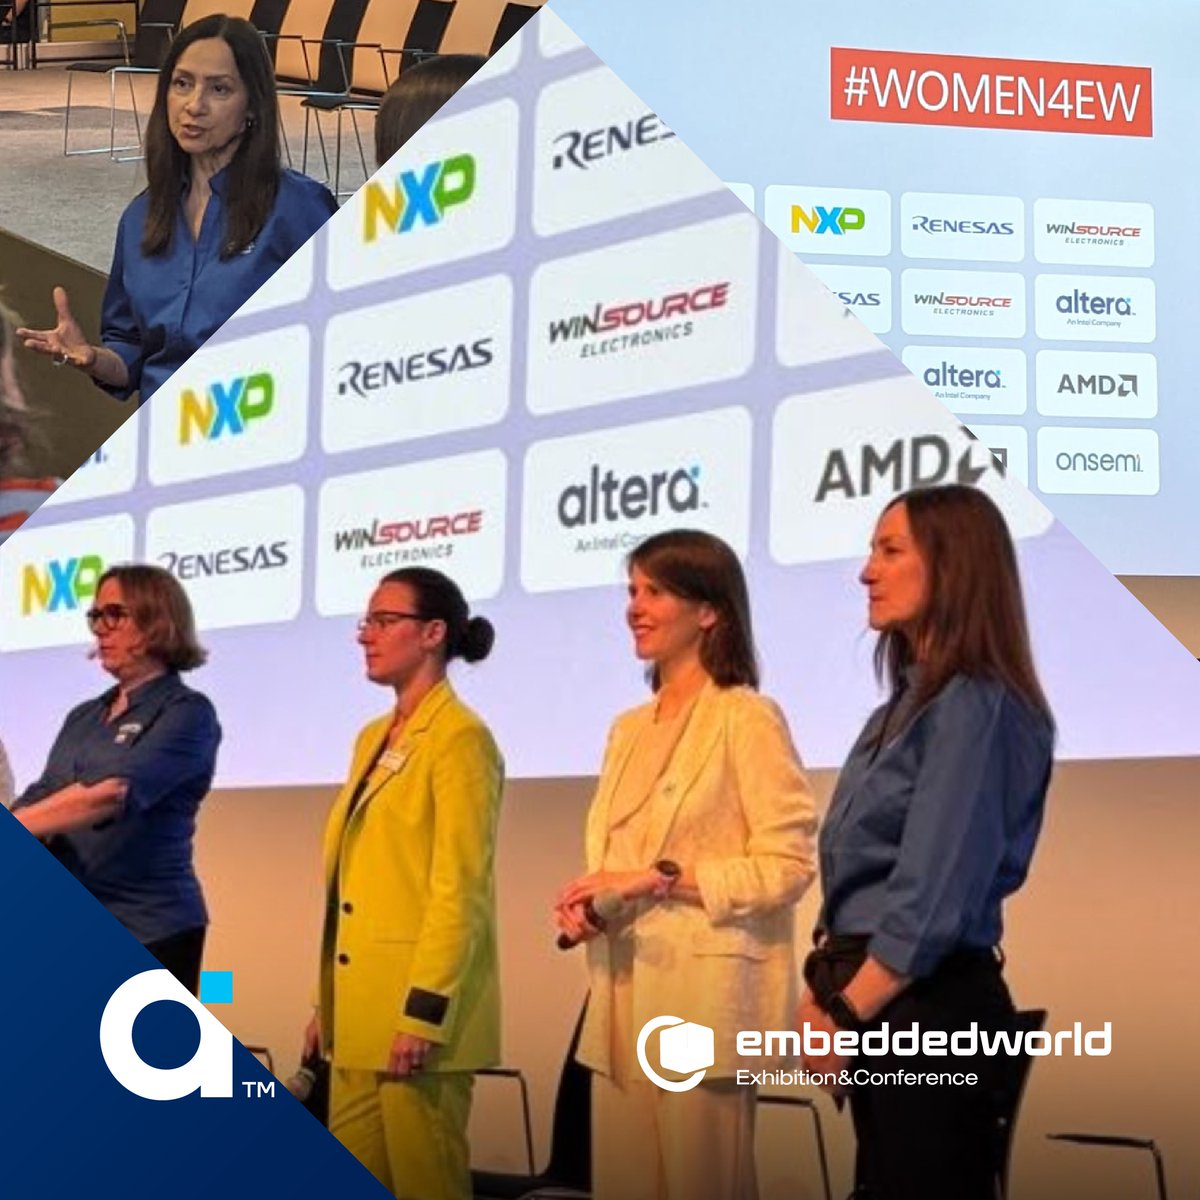 What an amazing and passionate group of women at #Women4EW. It's an honor for Altera's women leaders to share their experiences in an event focused on improving diversity in the embedded industry. Here's some action shots from today's event.